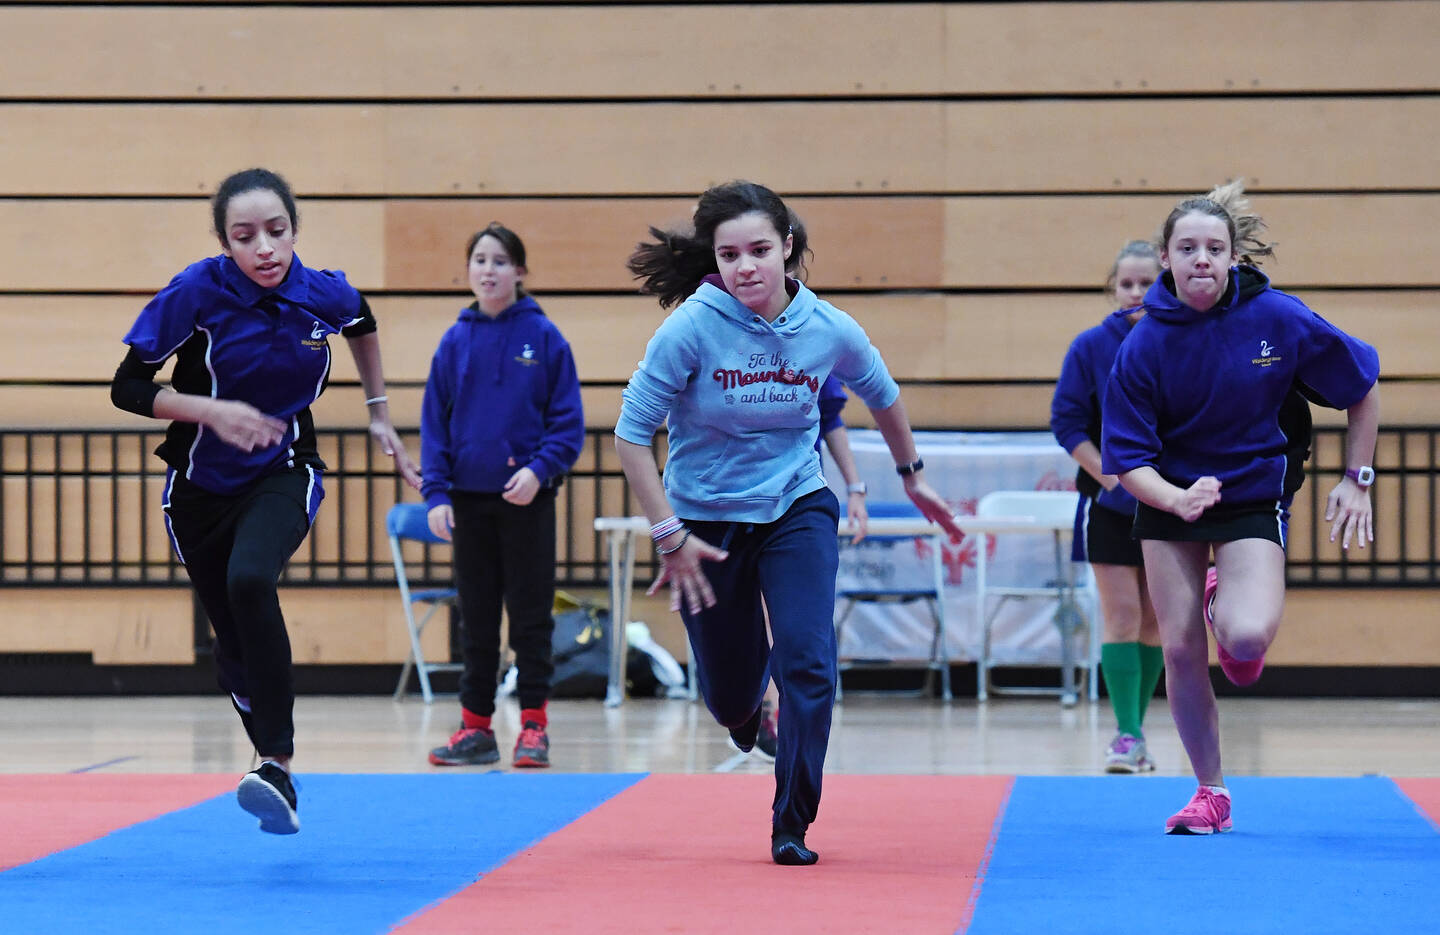 Teenage girls taking part in a sprint race during a PE session.